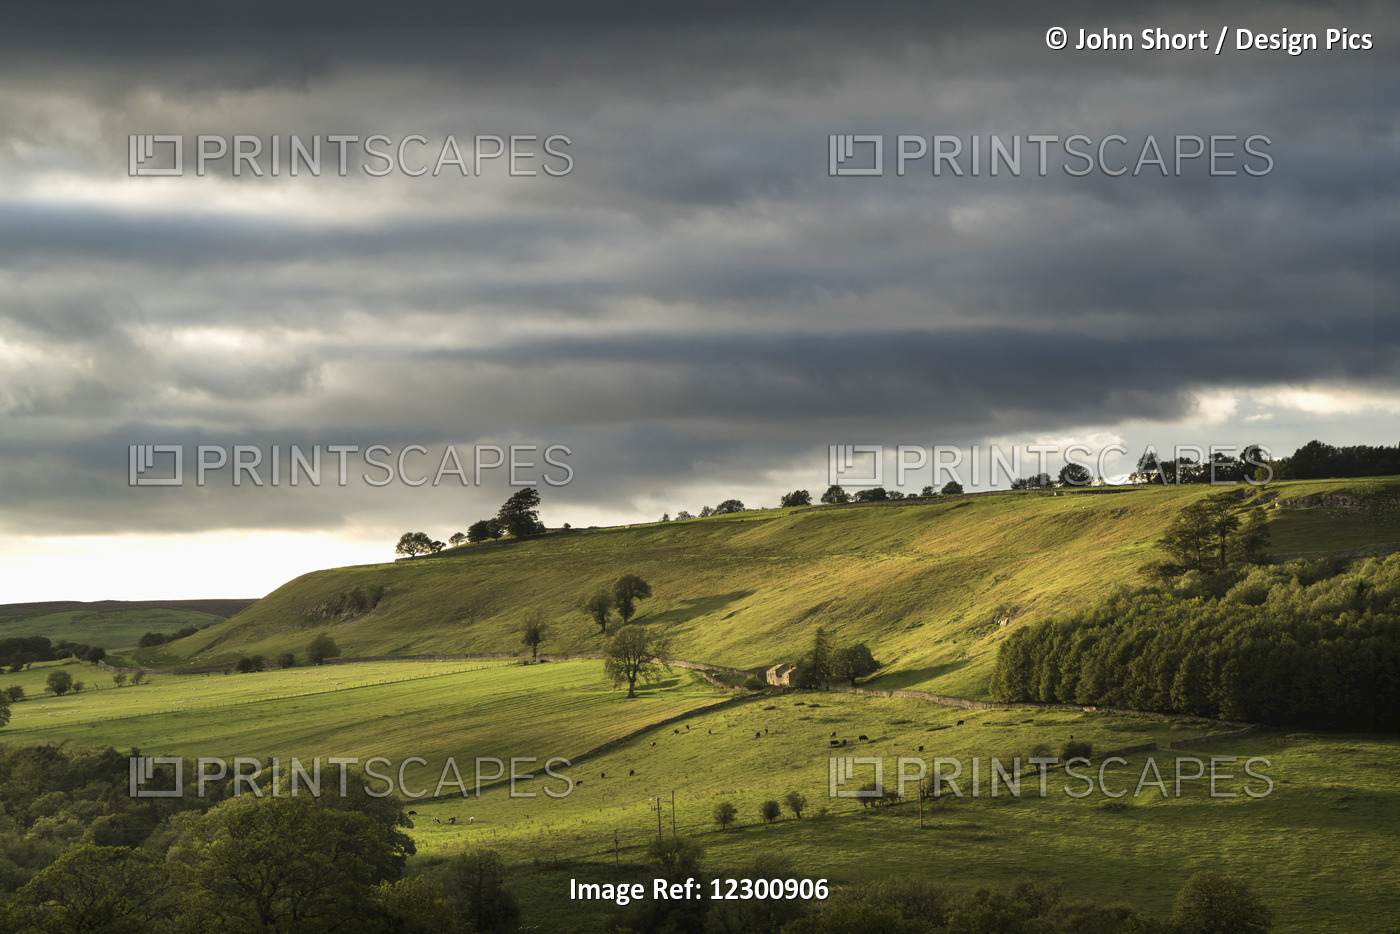 Green Fields On Rolling Hills Under A Cloudy Sky; Yorkshire Dales, England